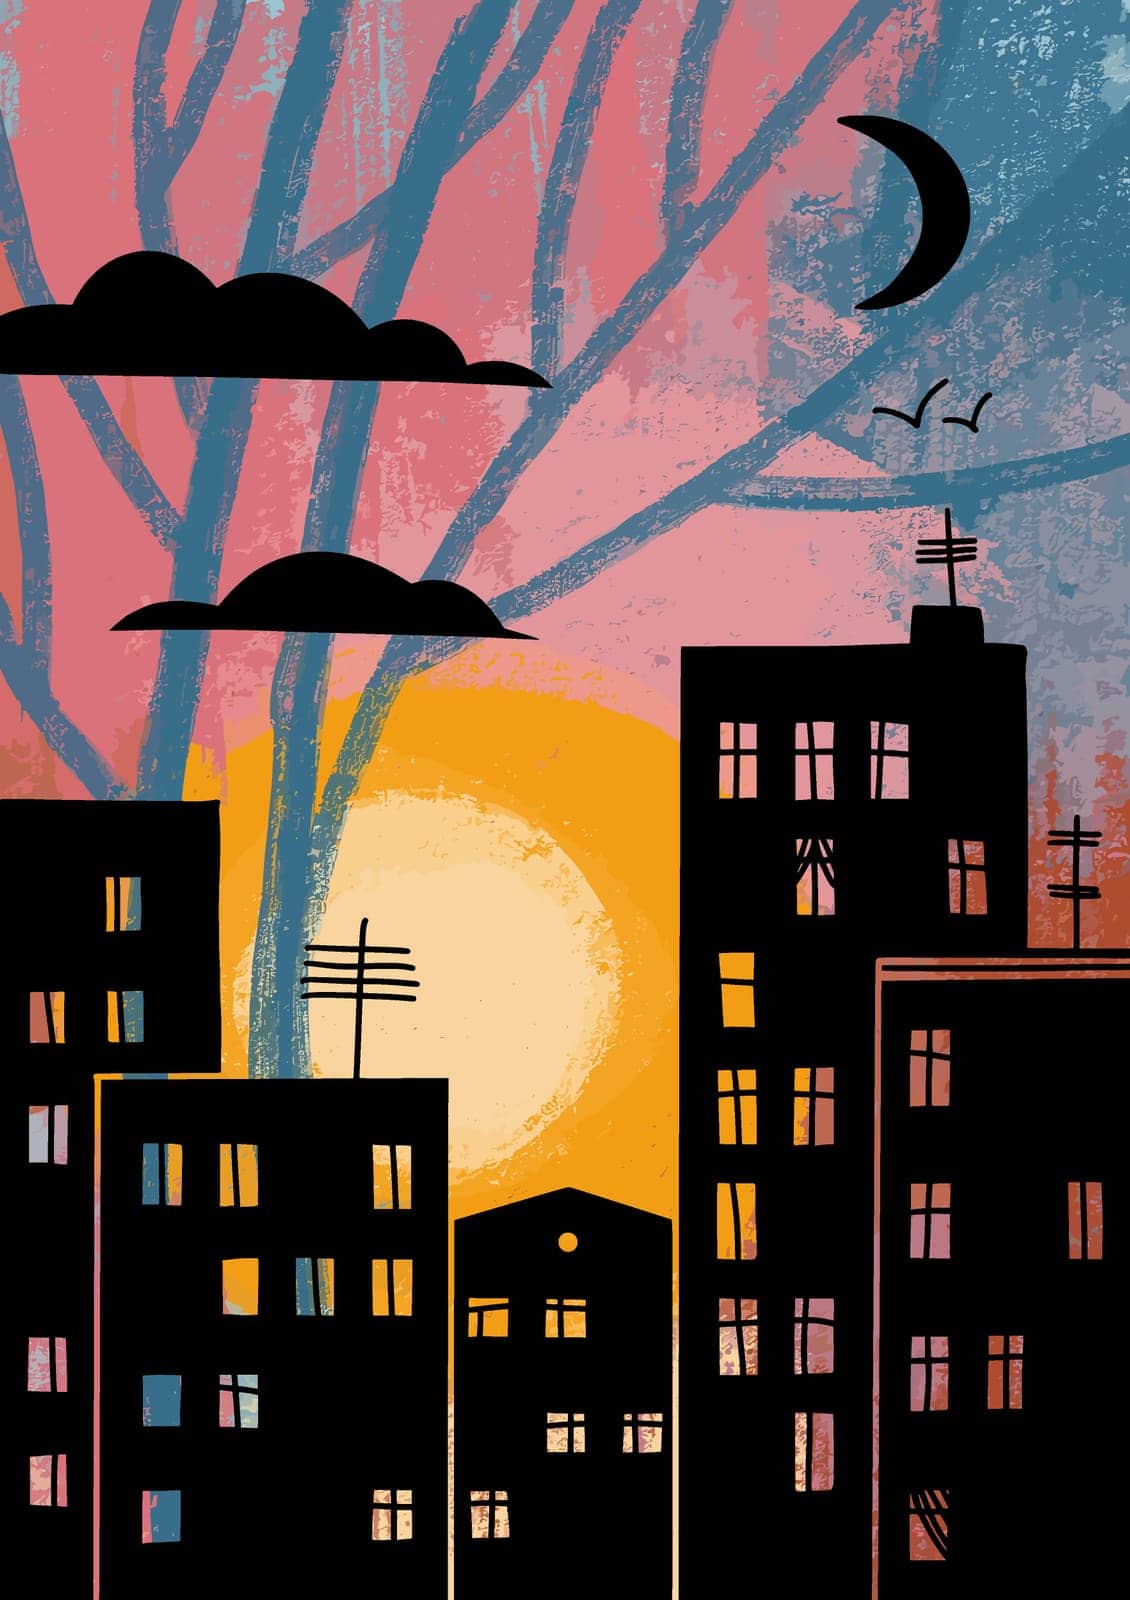 Stylized City Sunset Vertical Drawing. Black Silhouette on Pastel Colored Background by LanaLeta